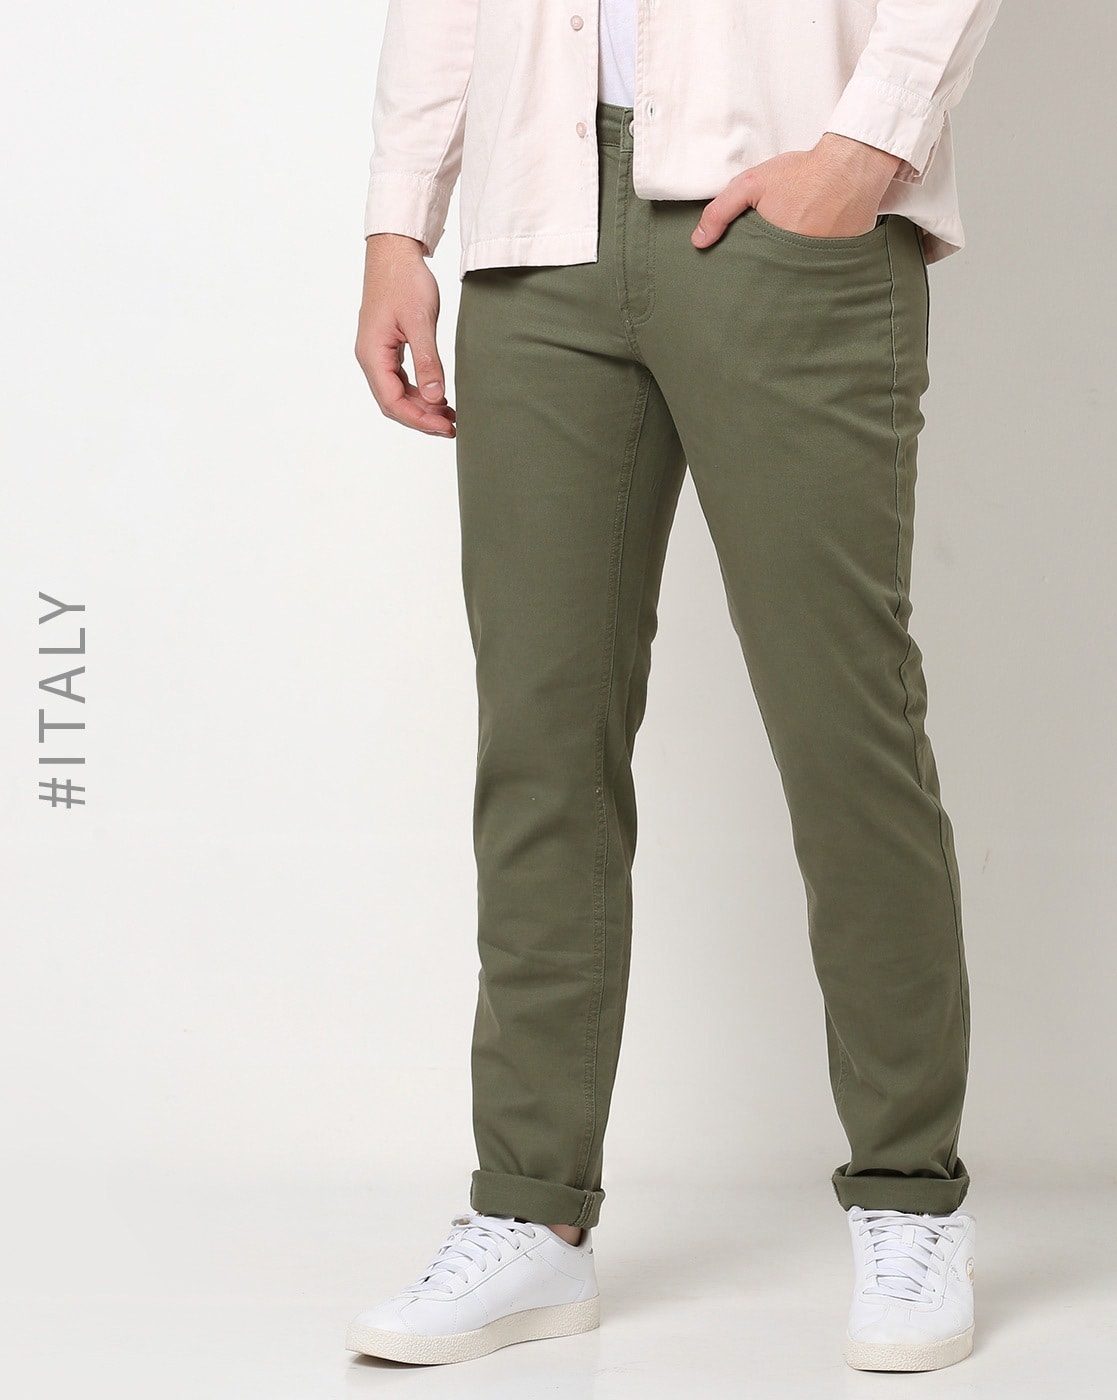 Army green pants fashion jeans designed for Men | Shopee Philippines